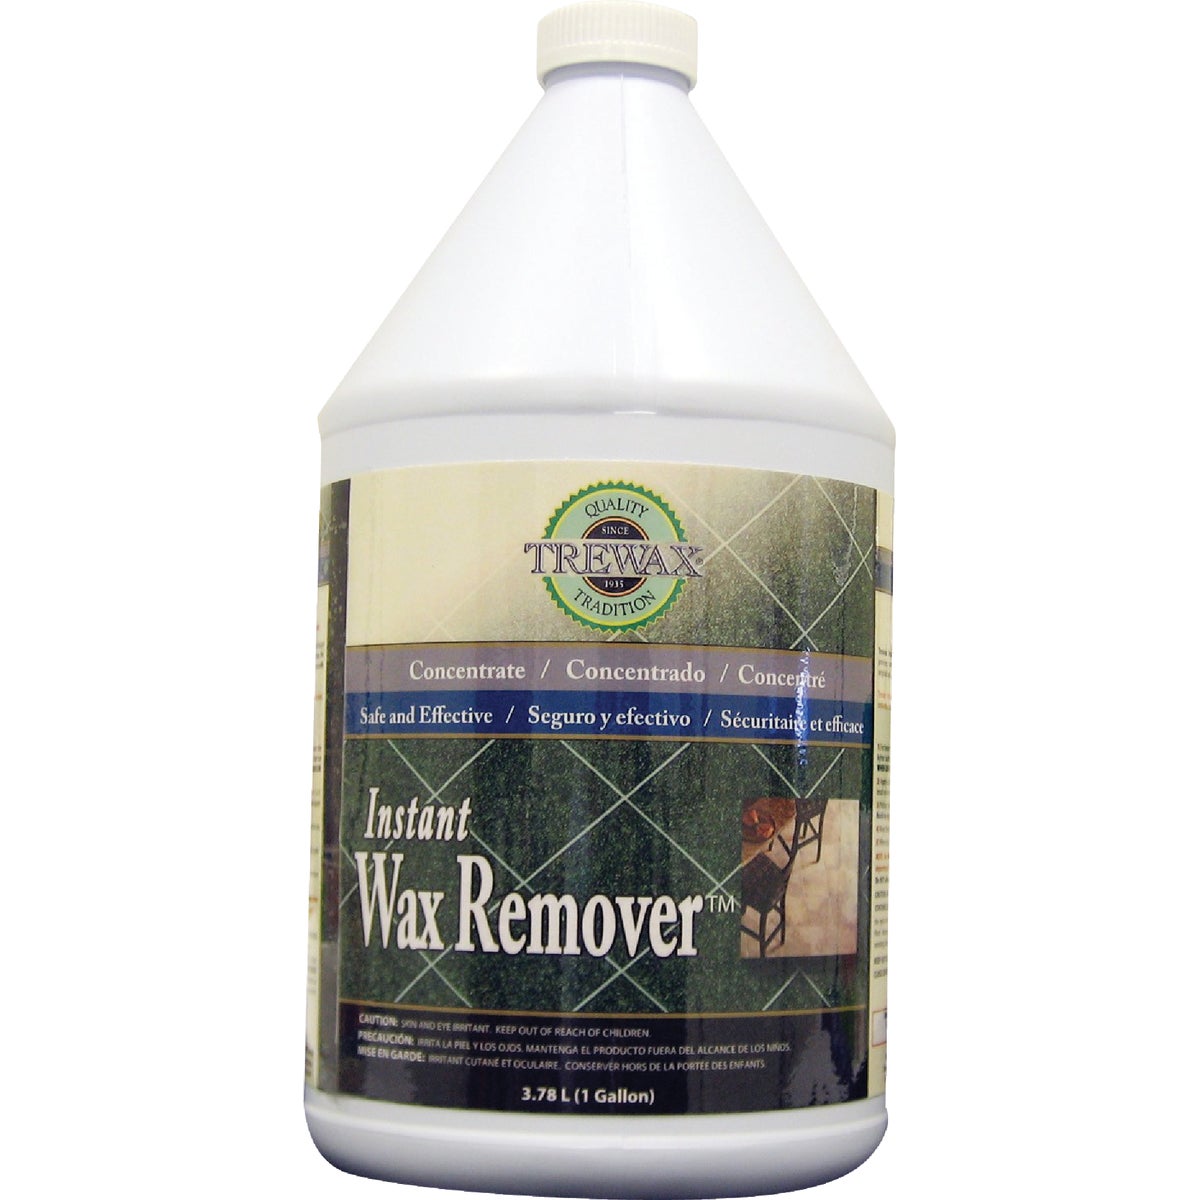 Trewax 1 Gal. Gold Label Wax Remover